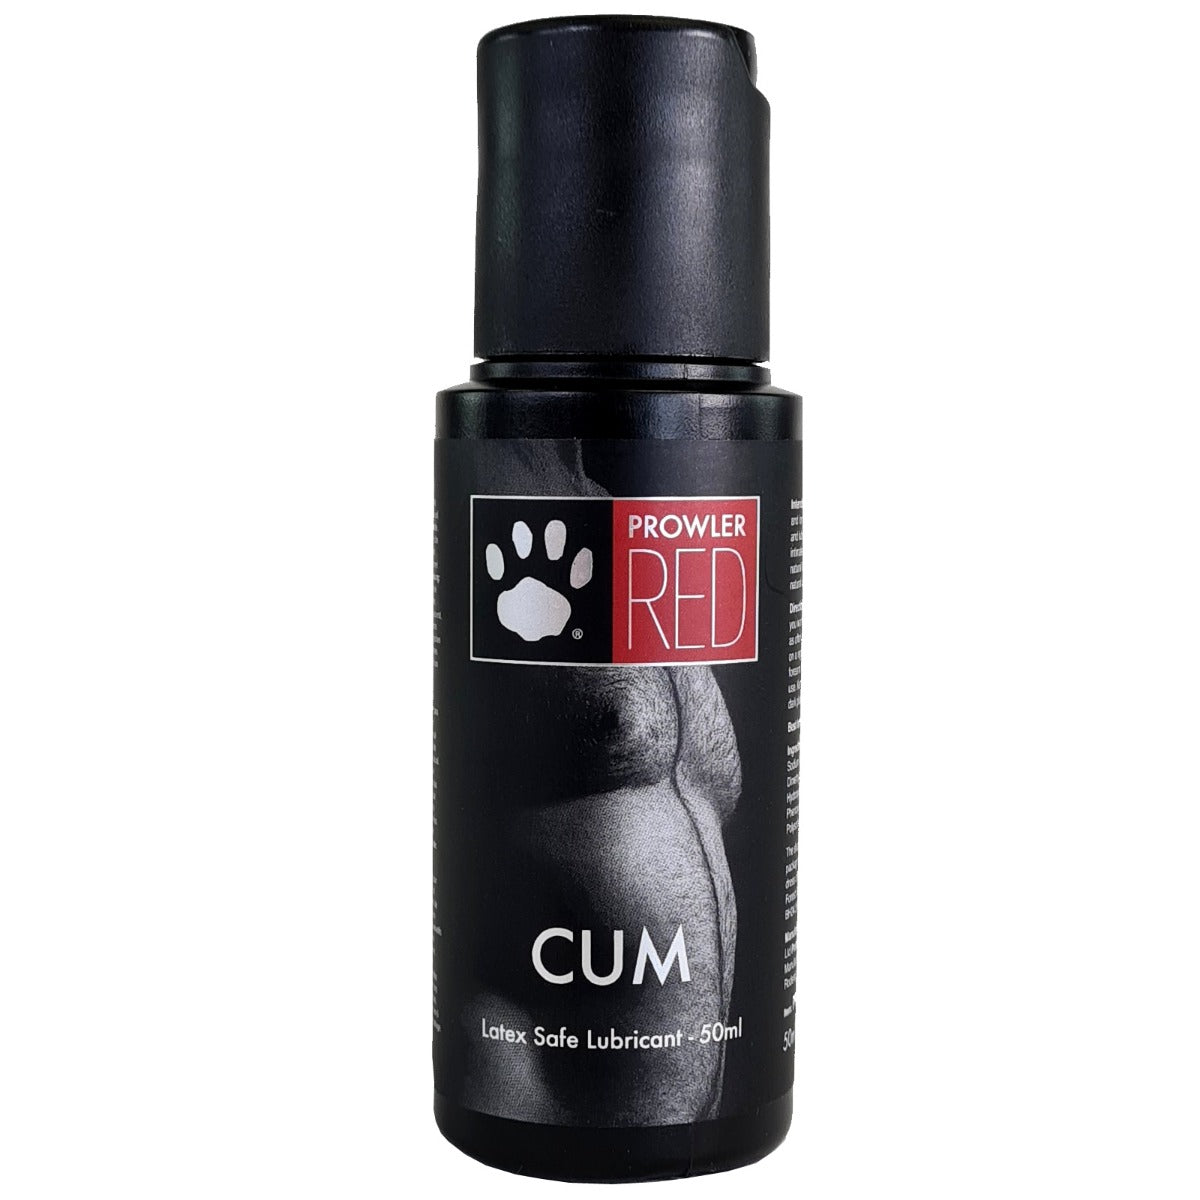 Prowler RED Cum Water-based Lube (7021005308068)